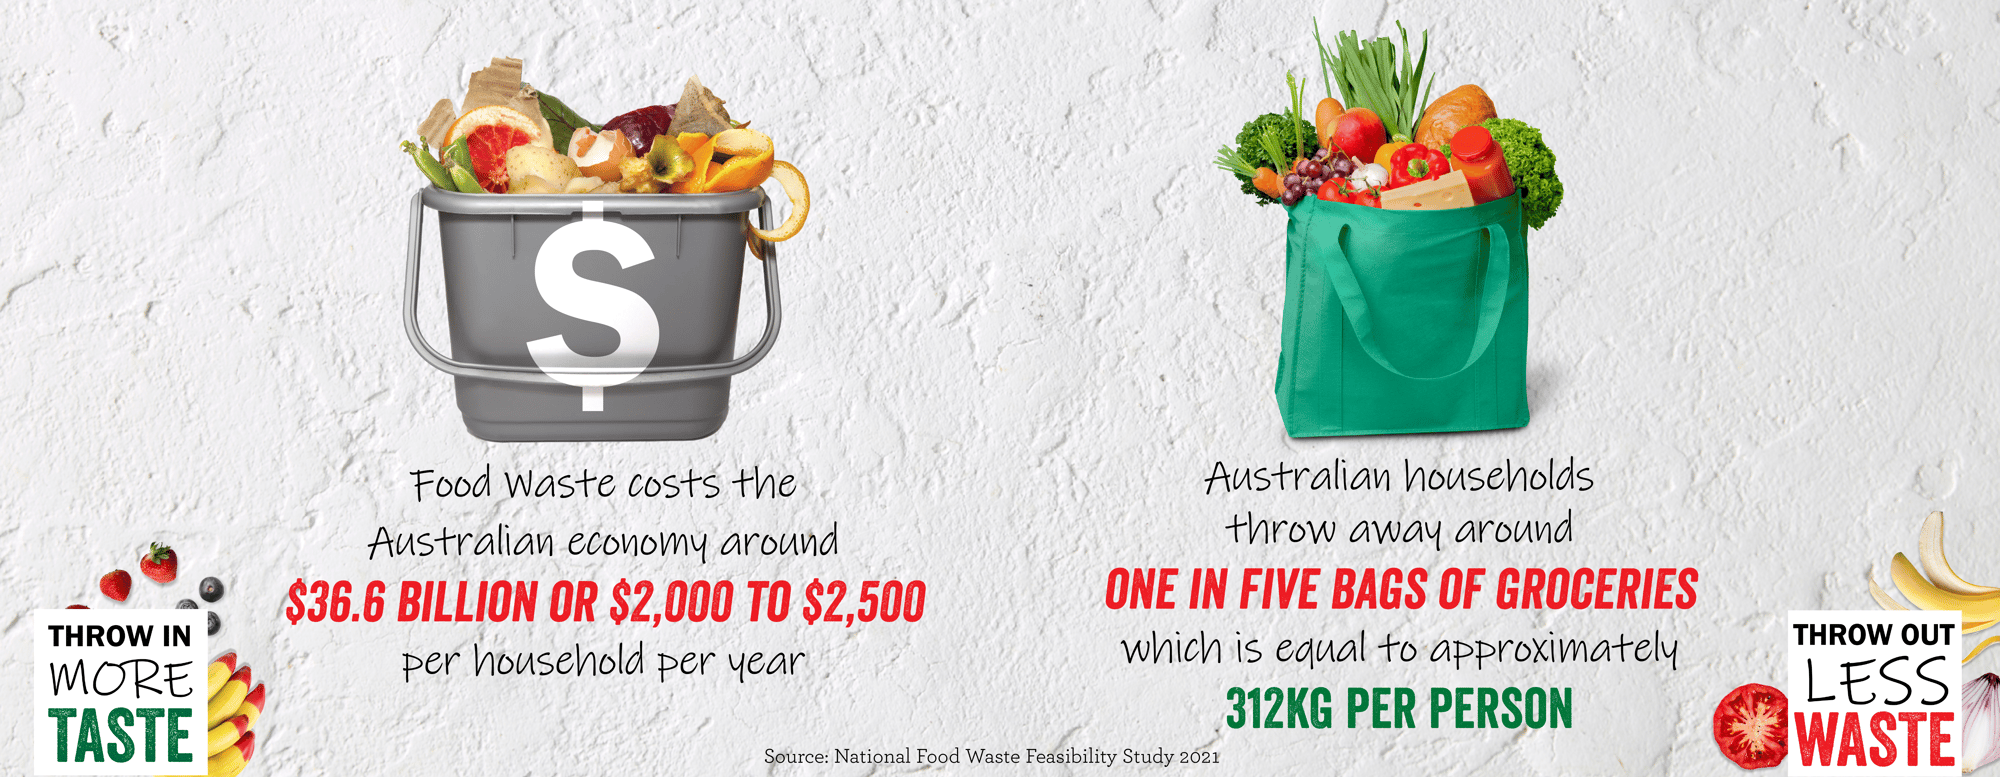 Food Waste Infographic - Banners-03